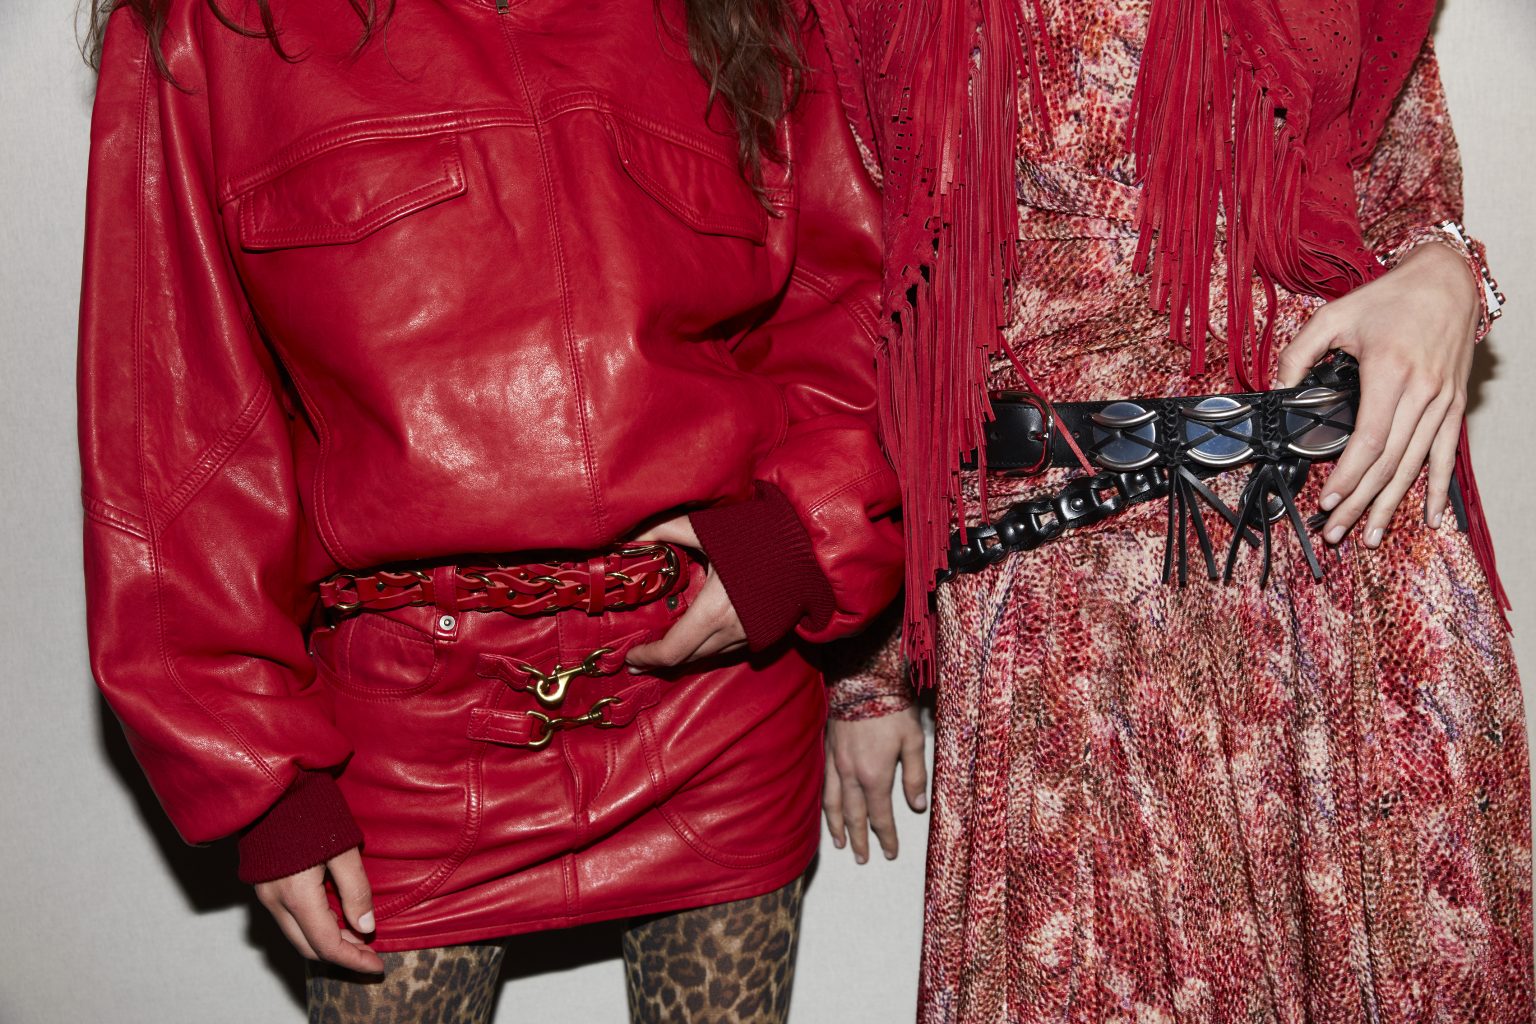 Two female midsections, one wearing a red patterned dress and red fringed scarf, the other in a red leather jacket and miniskirt.